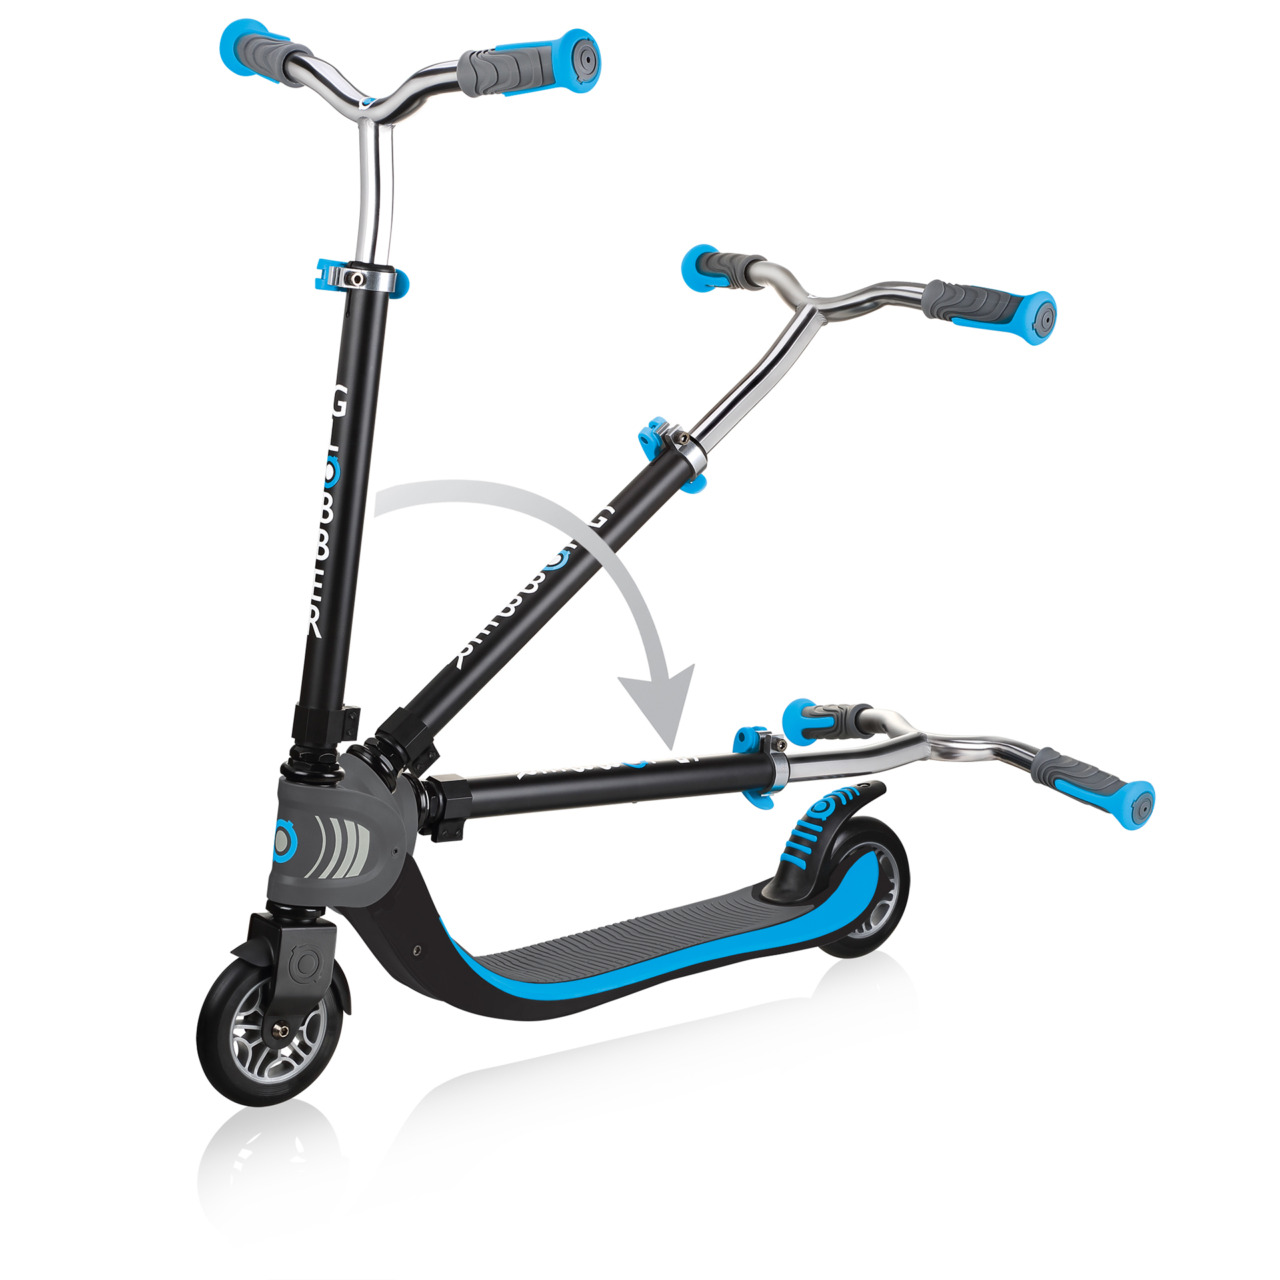 2 Wheel Fold Up Scooter